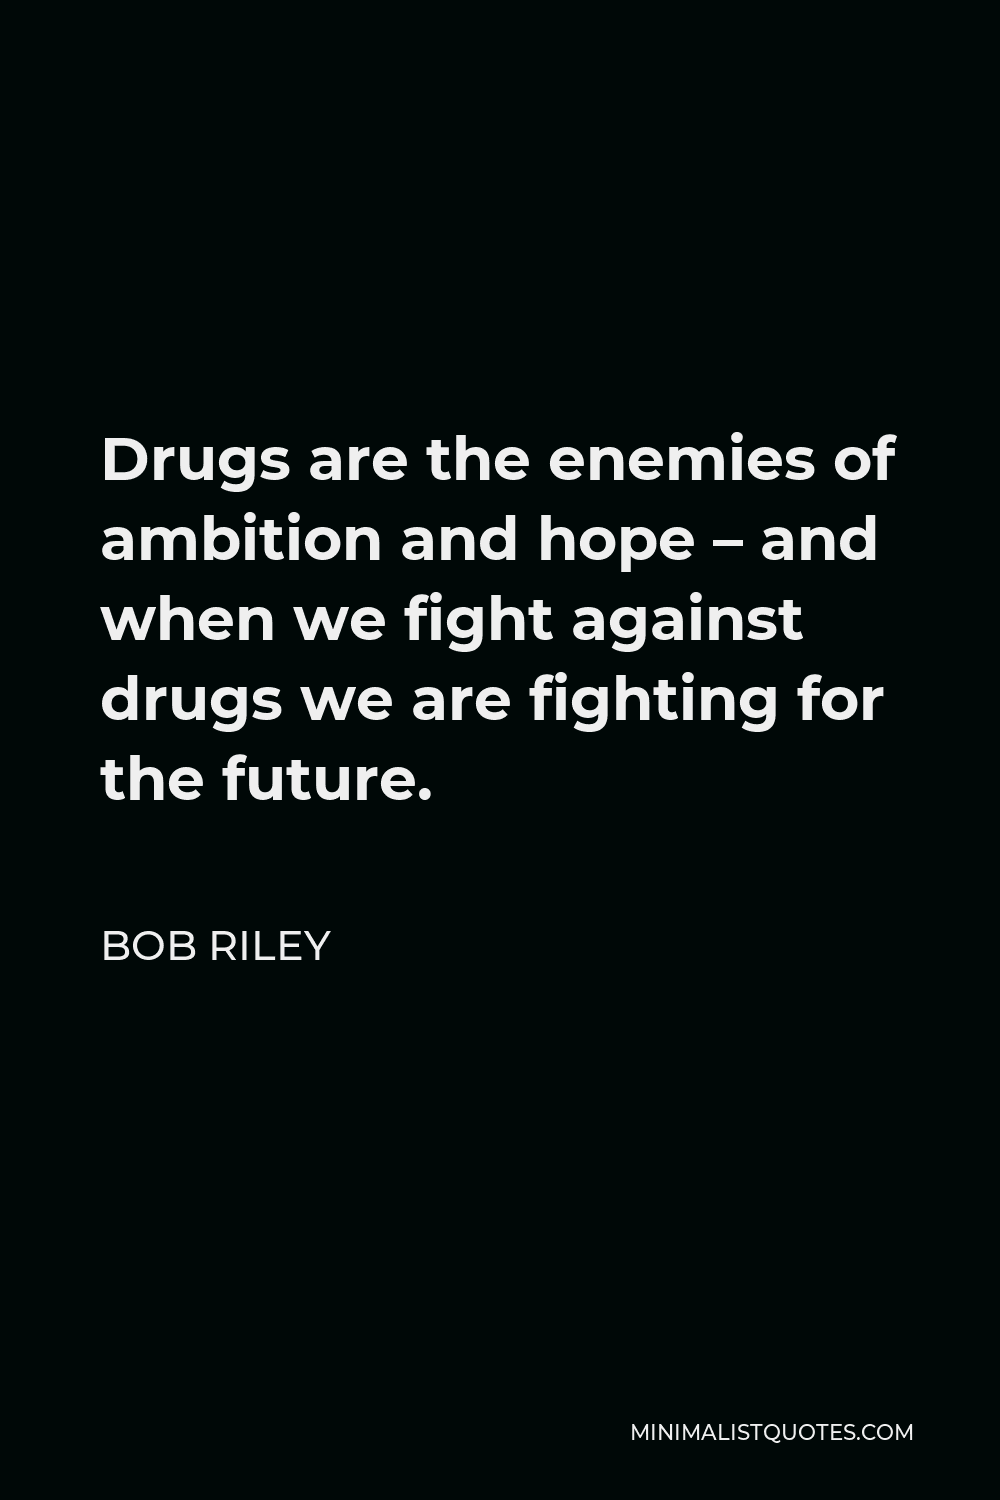 Bob Riley Quote - Drugs are the enemies of ambition and hope – and when we fight against drugs we are fighting for the future.